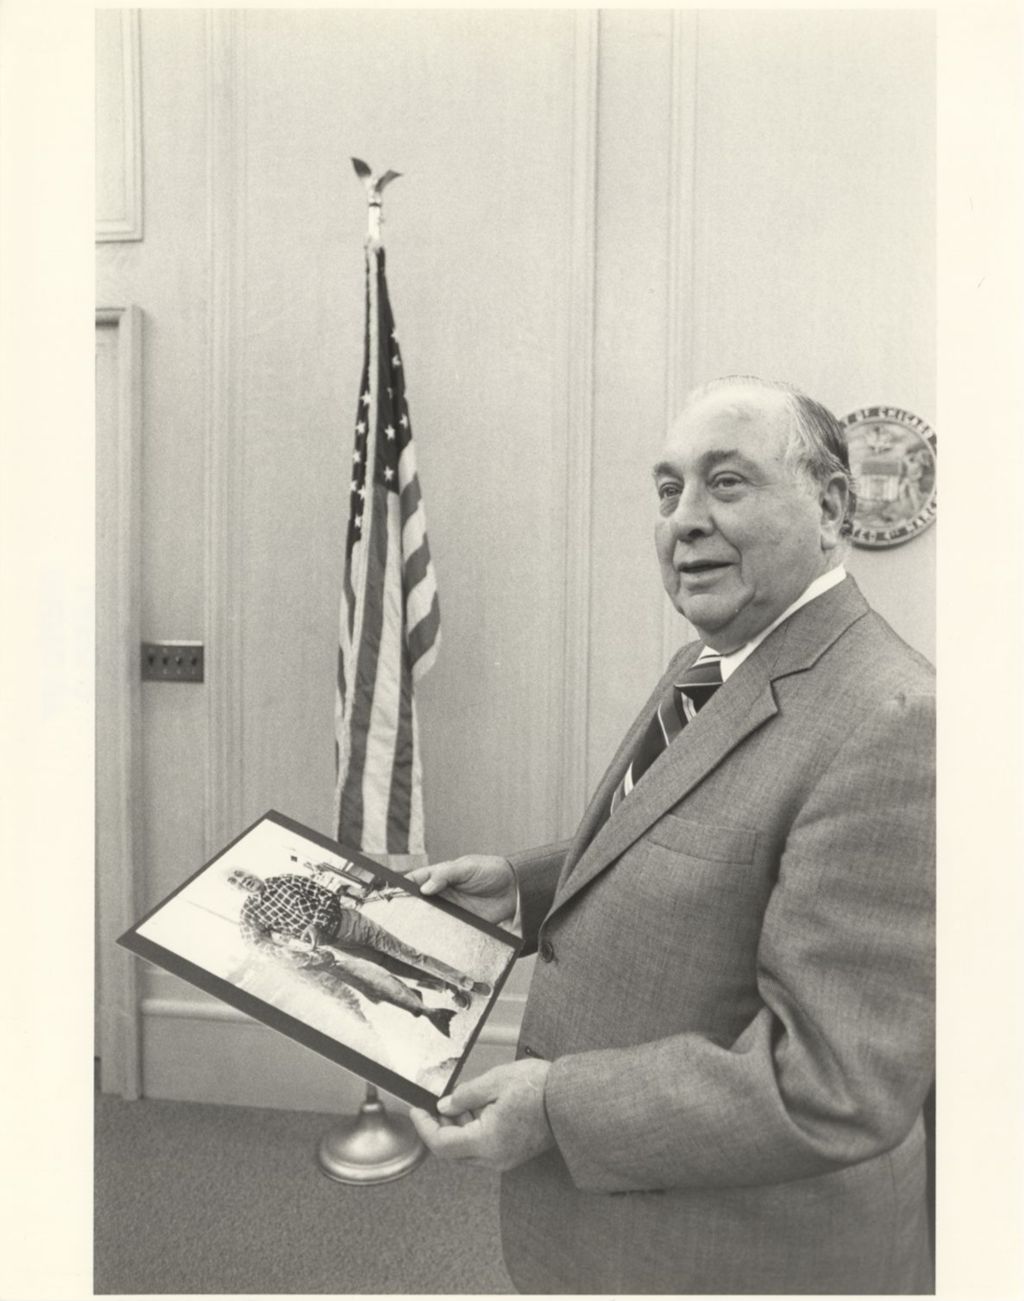 Richard J. Daley with a gift photograph